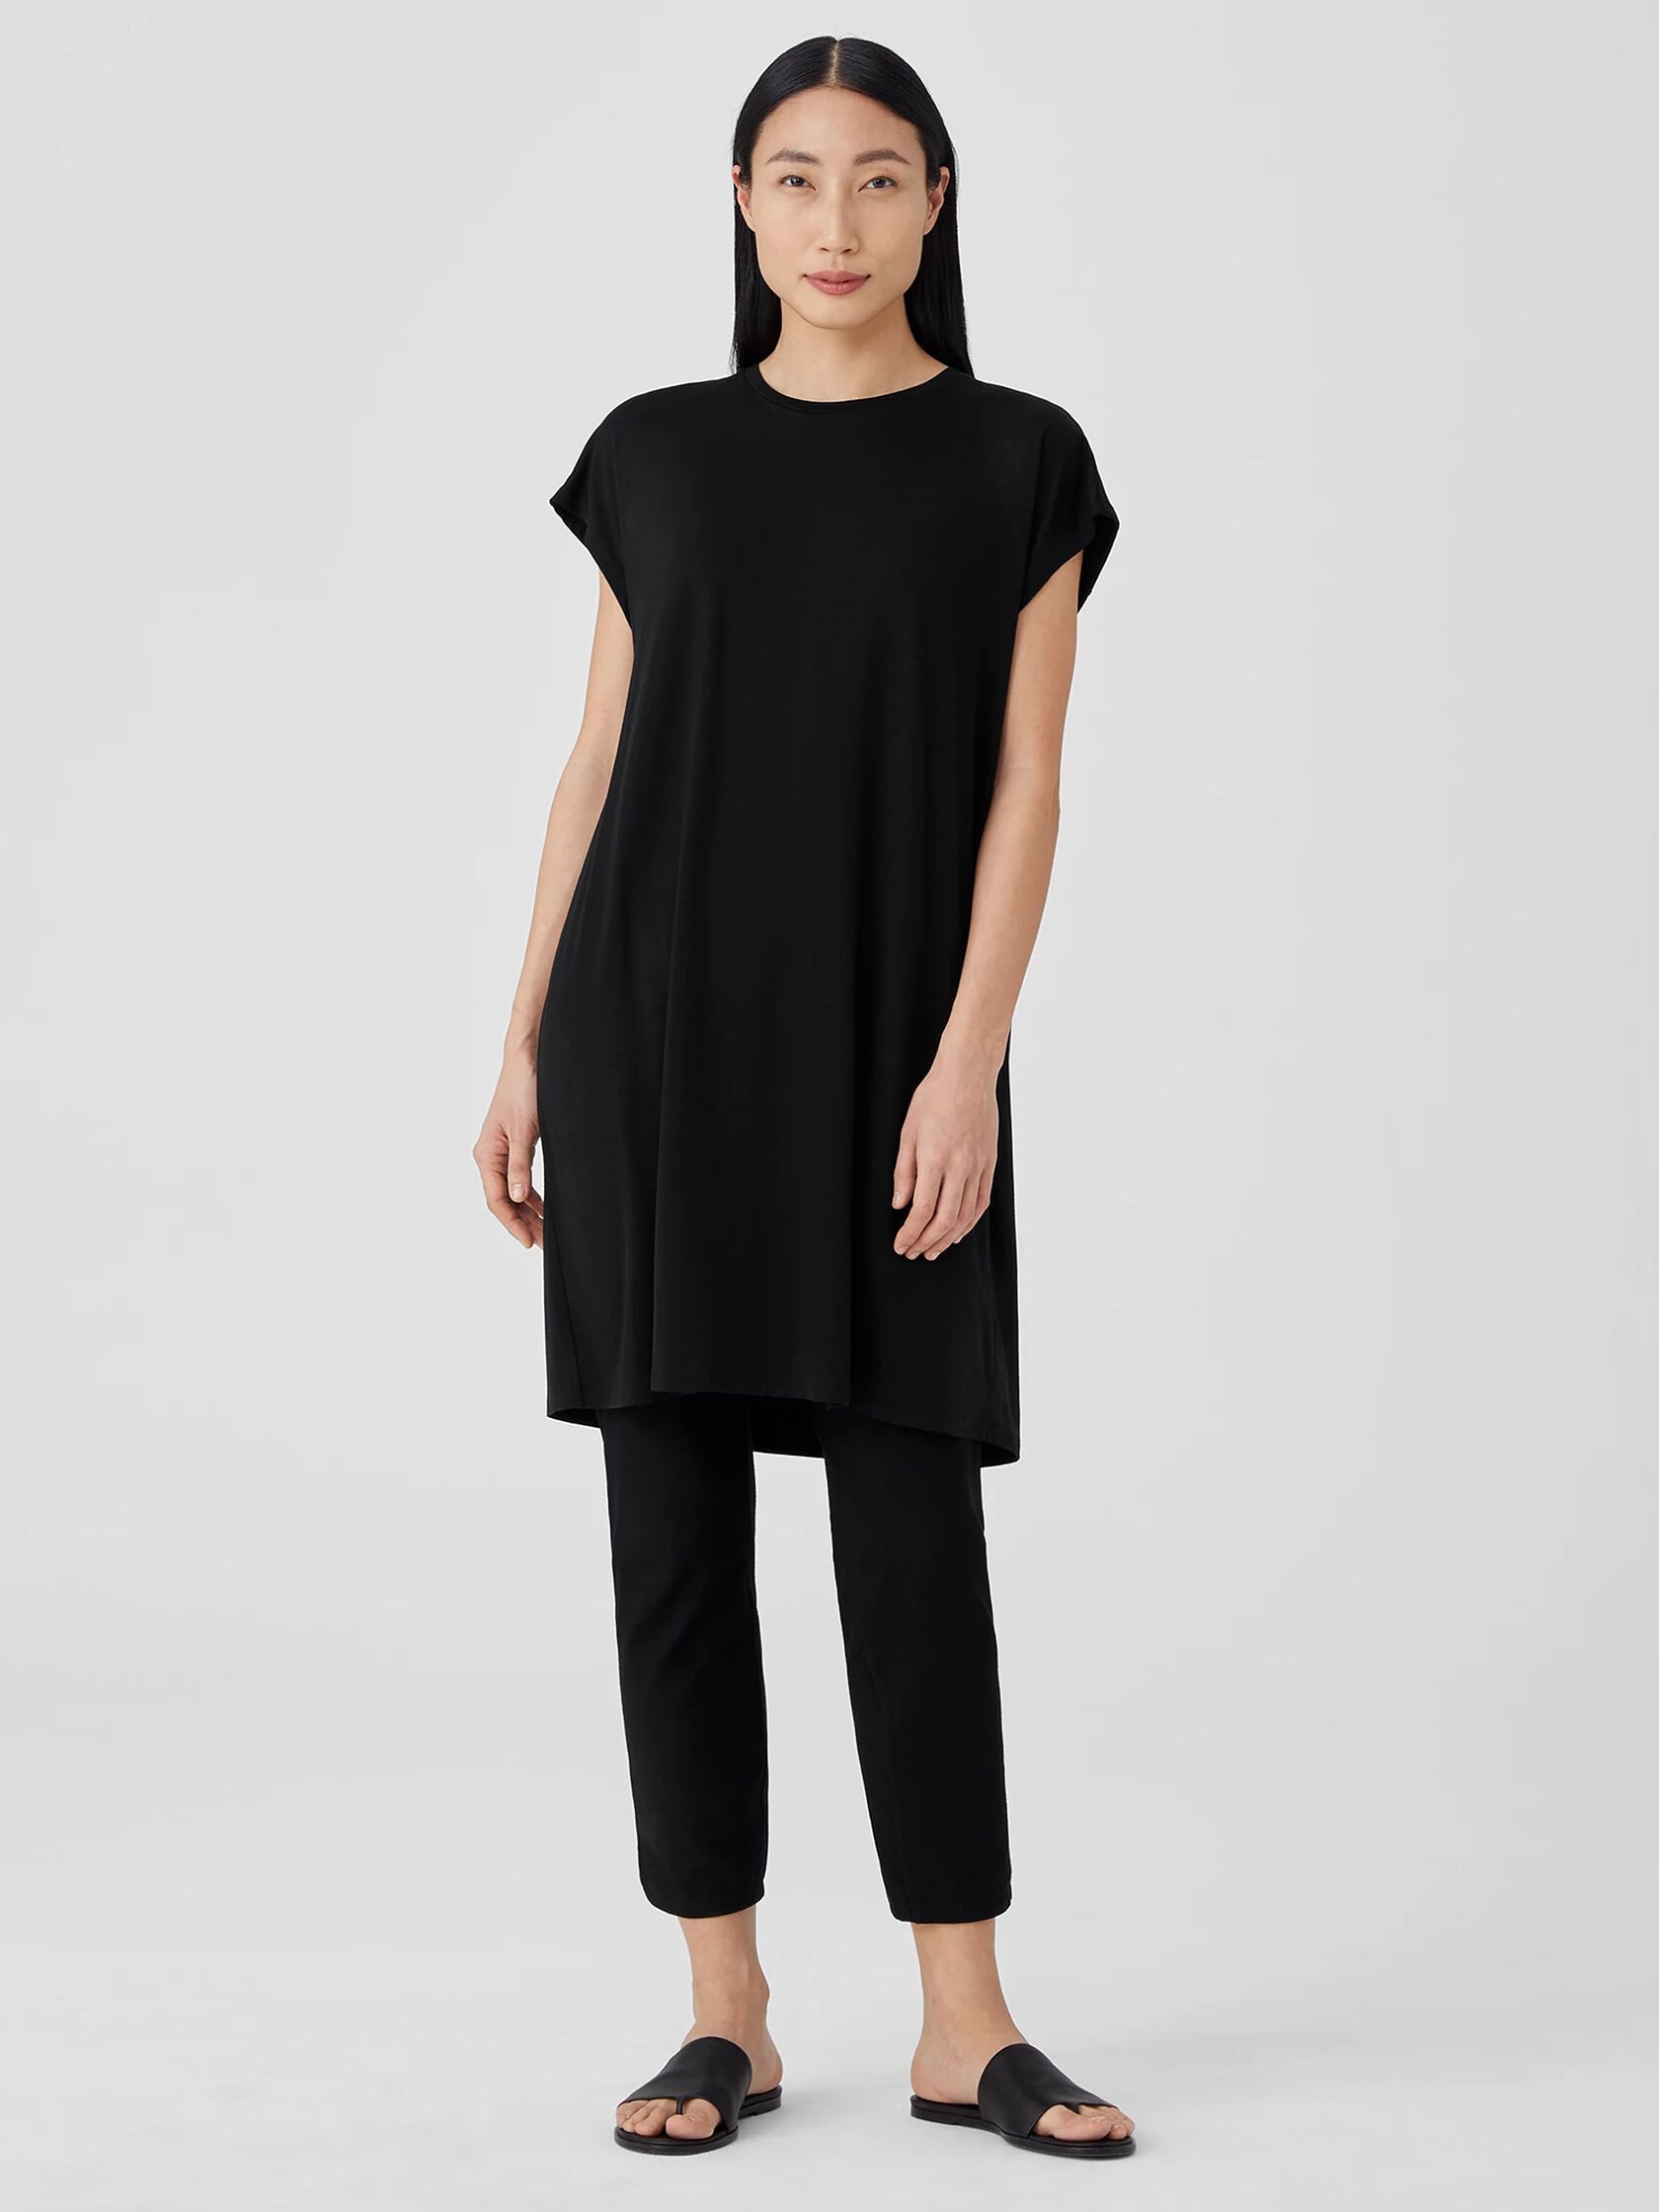 Washable Stretch Crepe Pant with Slits | EILEEN FISHER